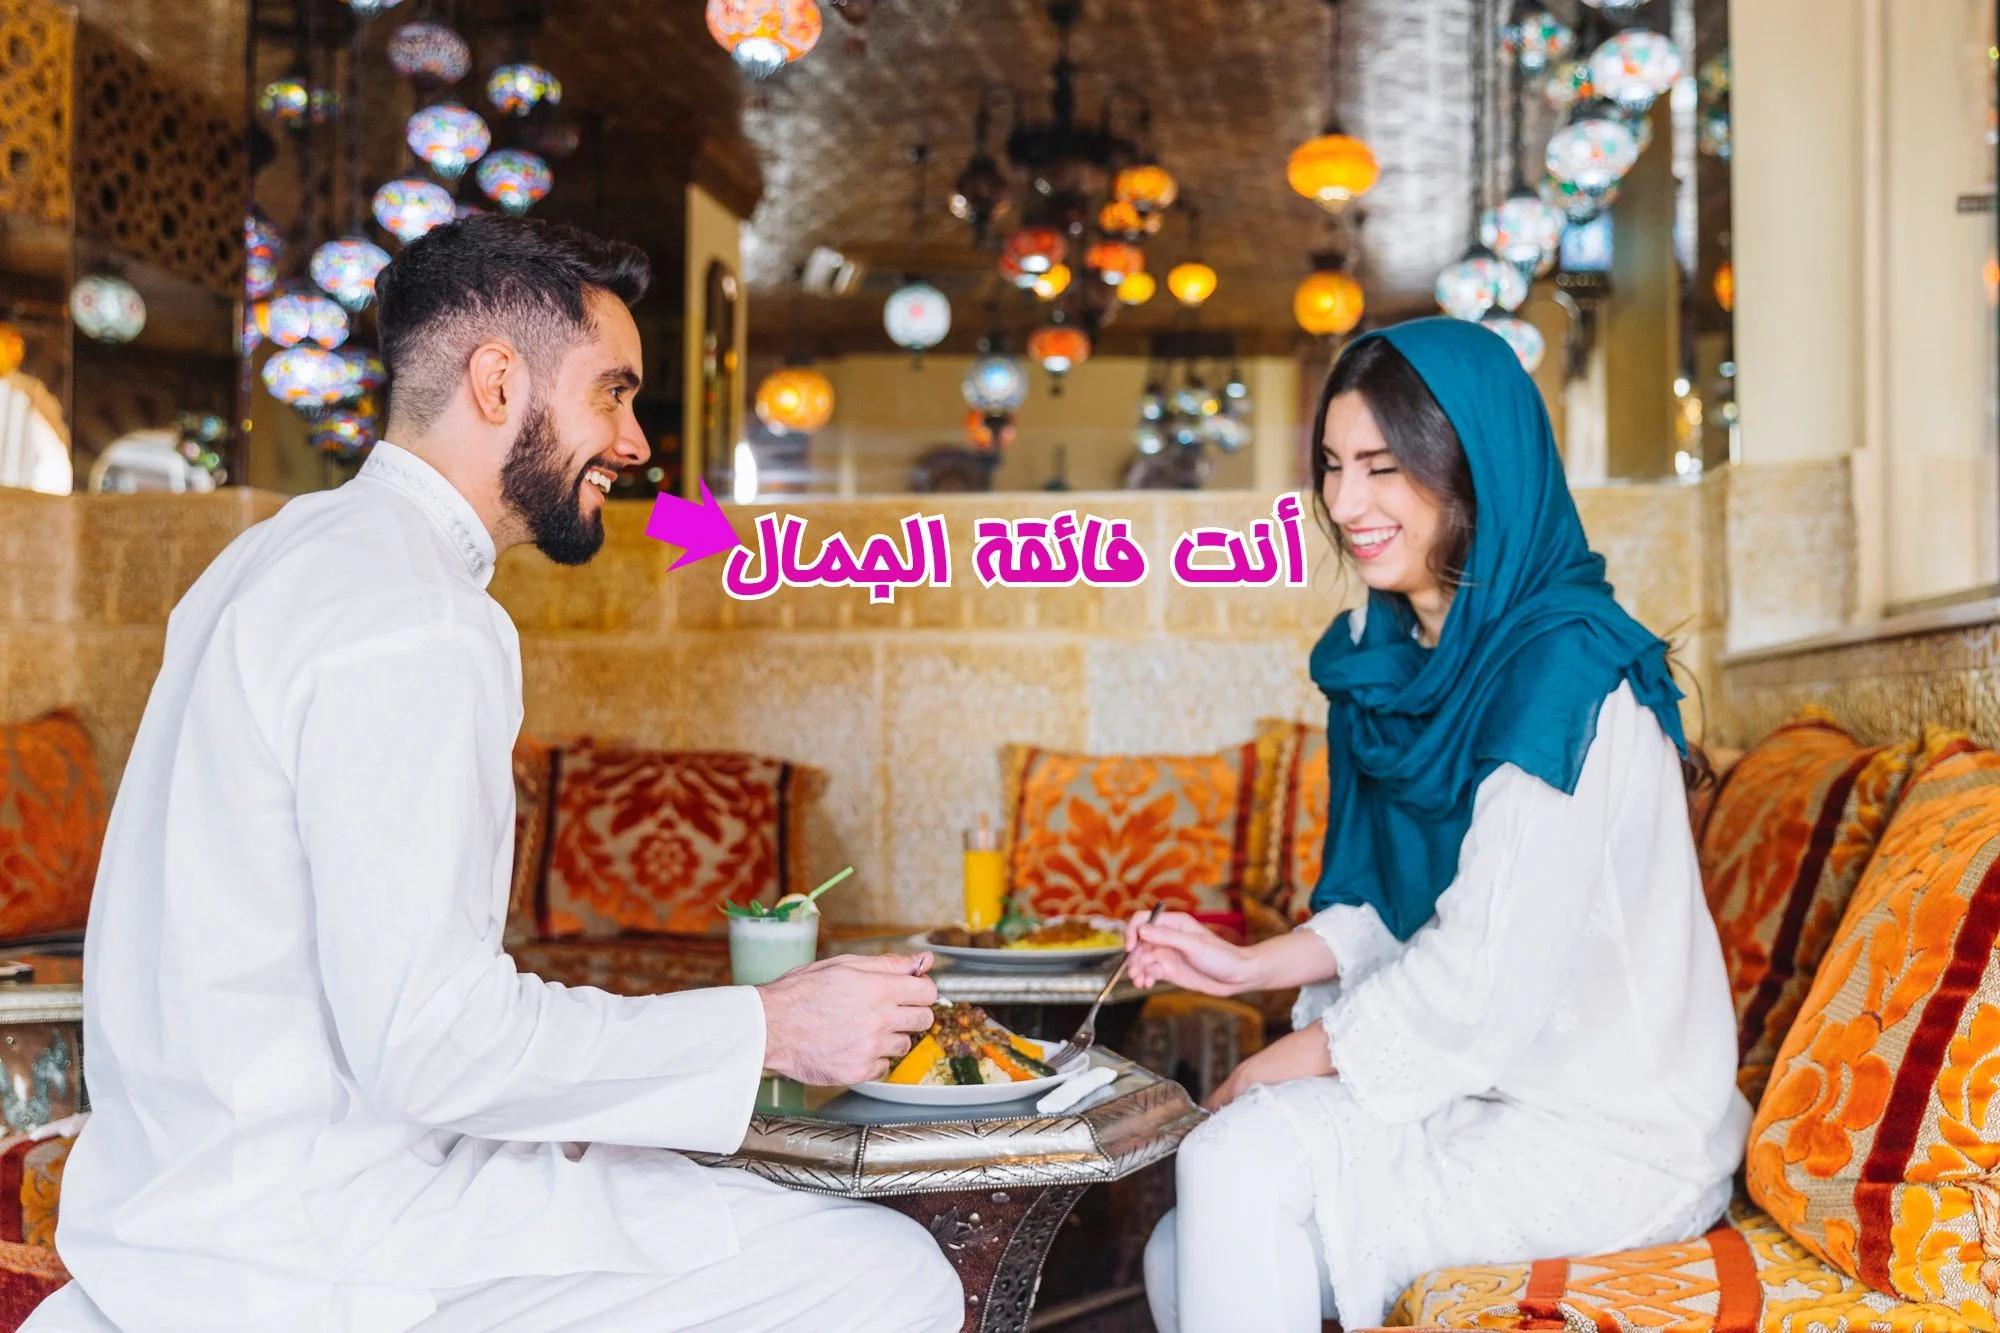 A smiling Arabian couple sitting together and holding hands